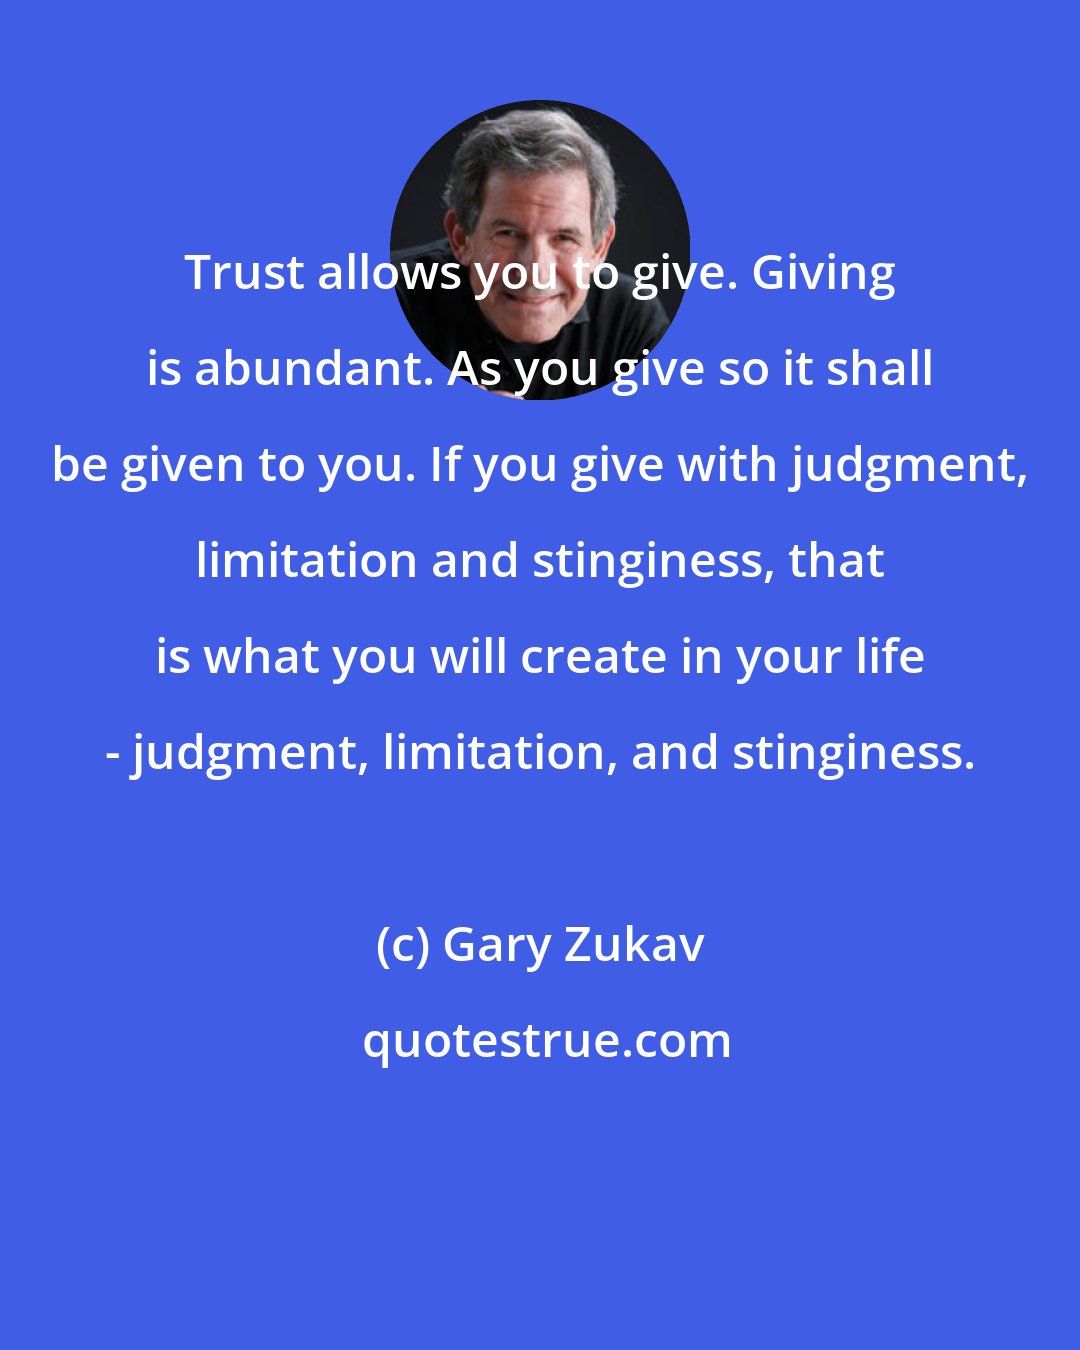 Gary Zukav: Trust allows you to give. Giving is abundant. As you give so it shall be given to you. If you give with judgment, limitation and stinginess, that is what you will create in your life - judgment, limitation, and stinginess.